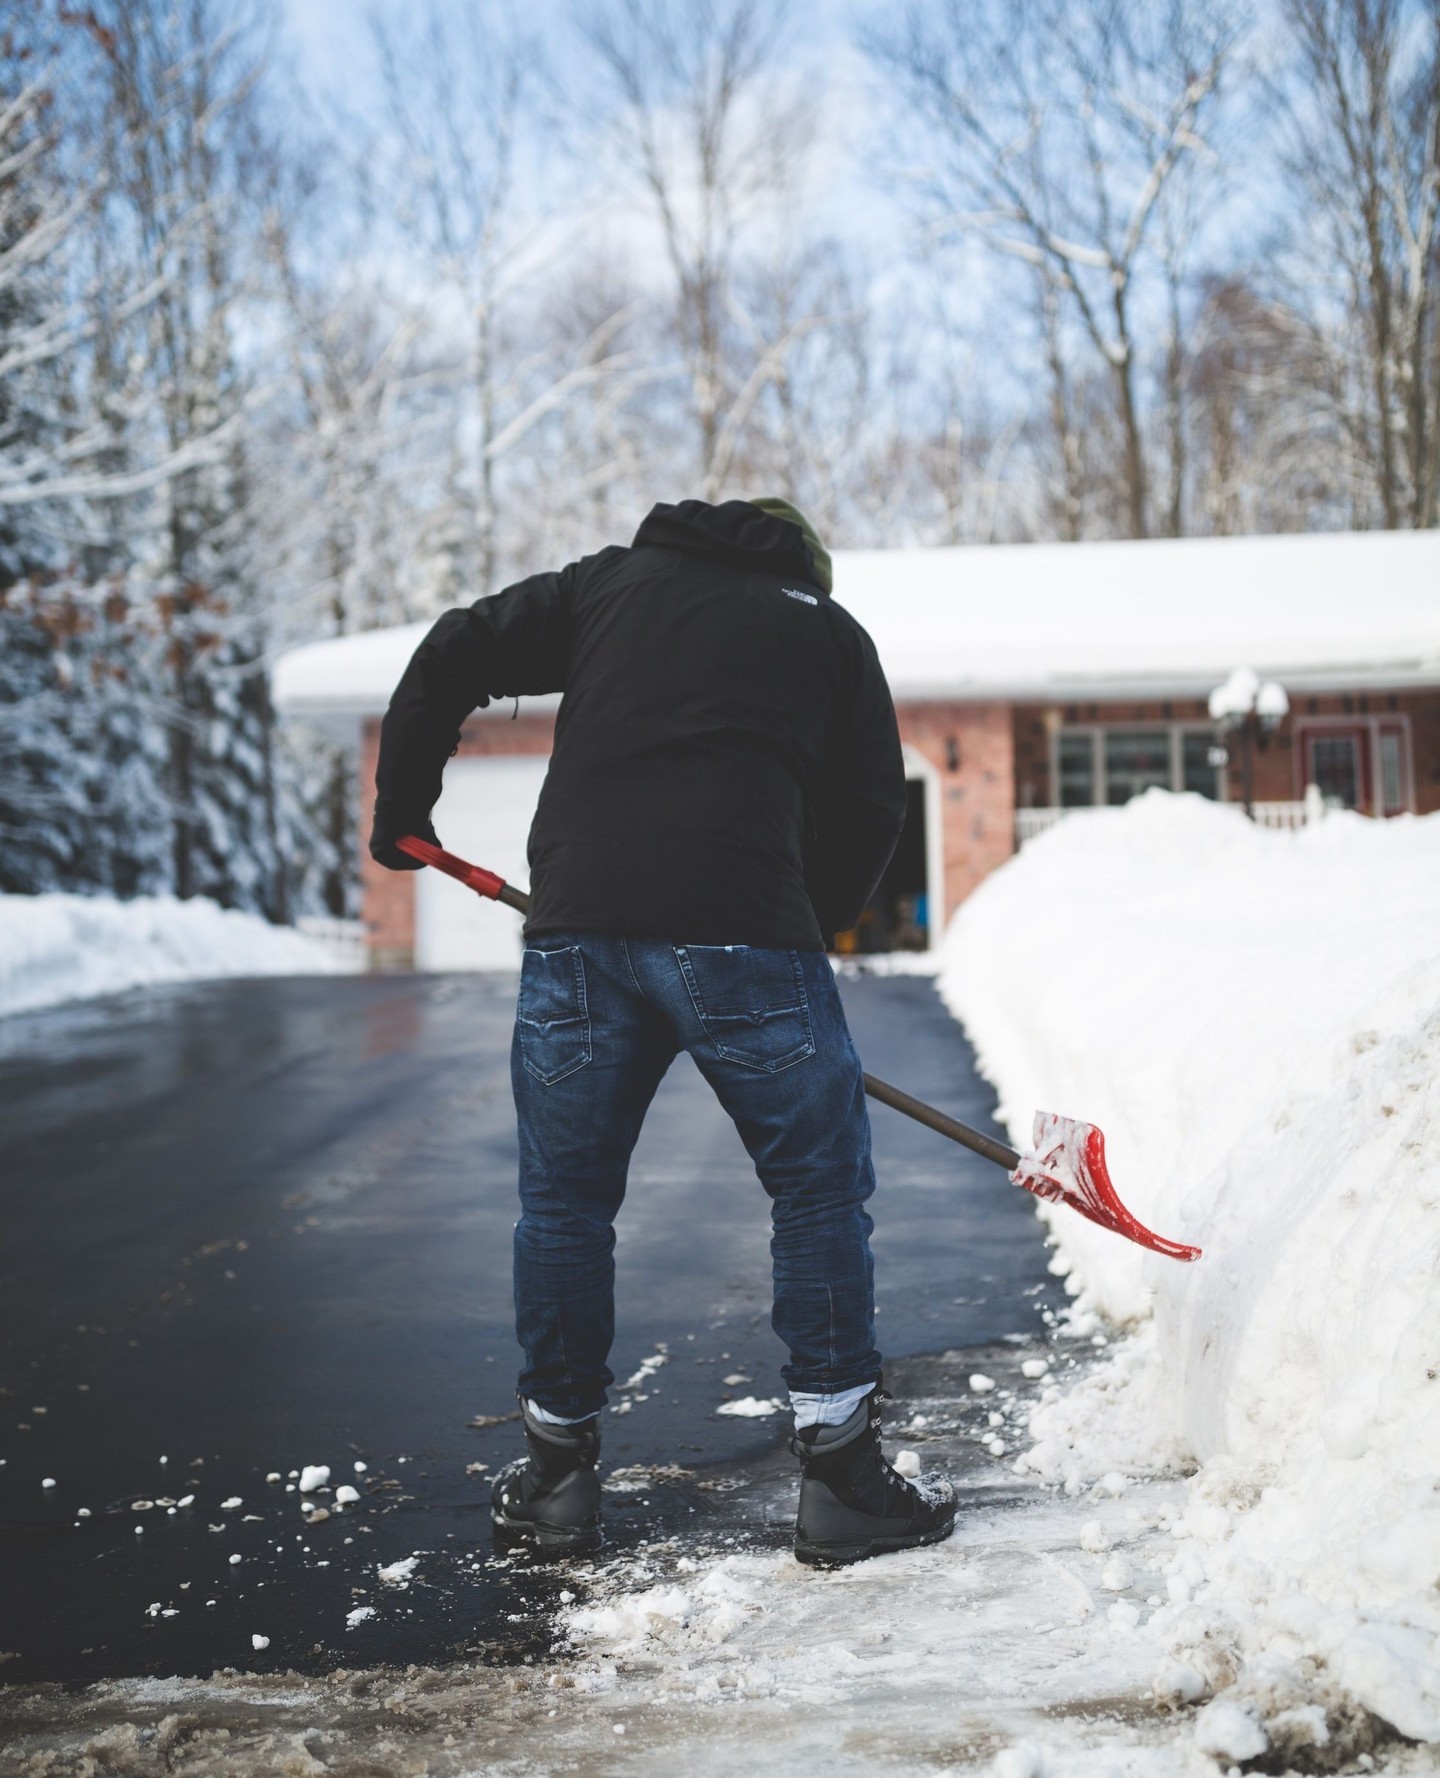 Minnesota winters: where managing your yard means mastering the art of snowscape stewardship, navigating snow blowers and safeguarding lawns from the chilly embrace of salted snowmelt.⁠⁠Here are 5 Ways to steward your yard this winter:⁠⁠️ Opt for Battery-Powered Snow Blowers⁠️ Swap Salt for Naturally Textured Substrates⁠️ Explore Natural De-icing Agents⁠️ Shoveling: ⁠️ Anti-Icing ⁠⁠Tap the link in bio to read to learn more.⁠ — from Instagram